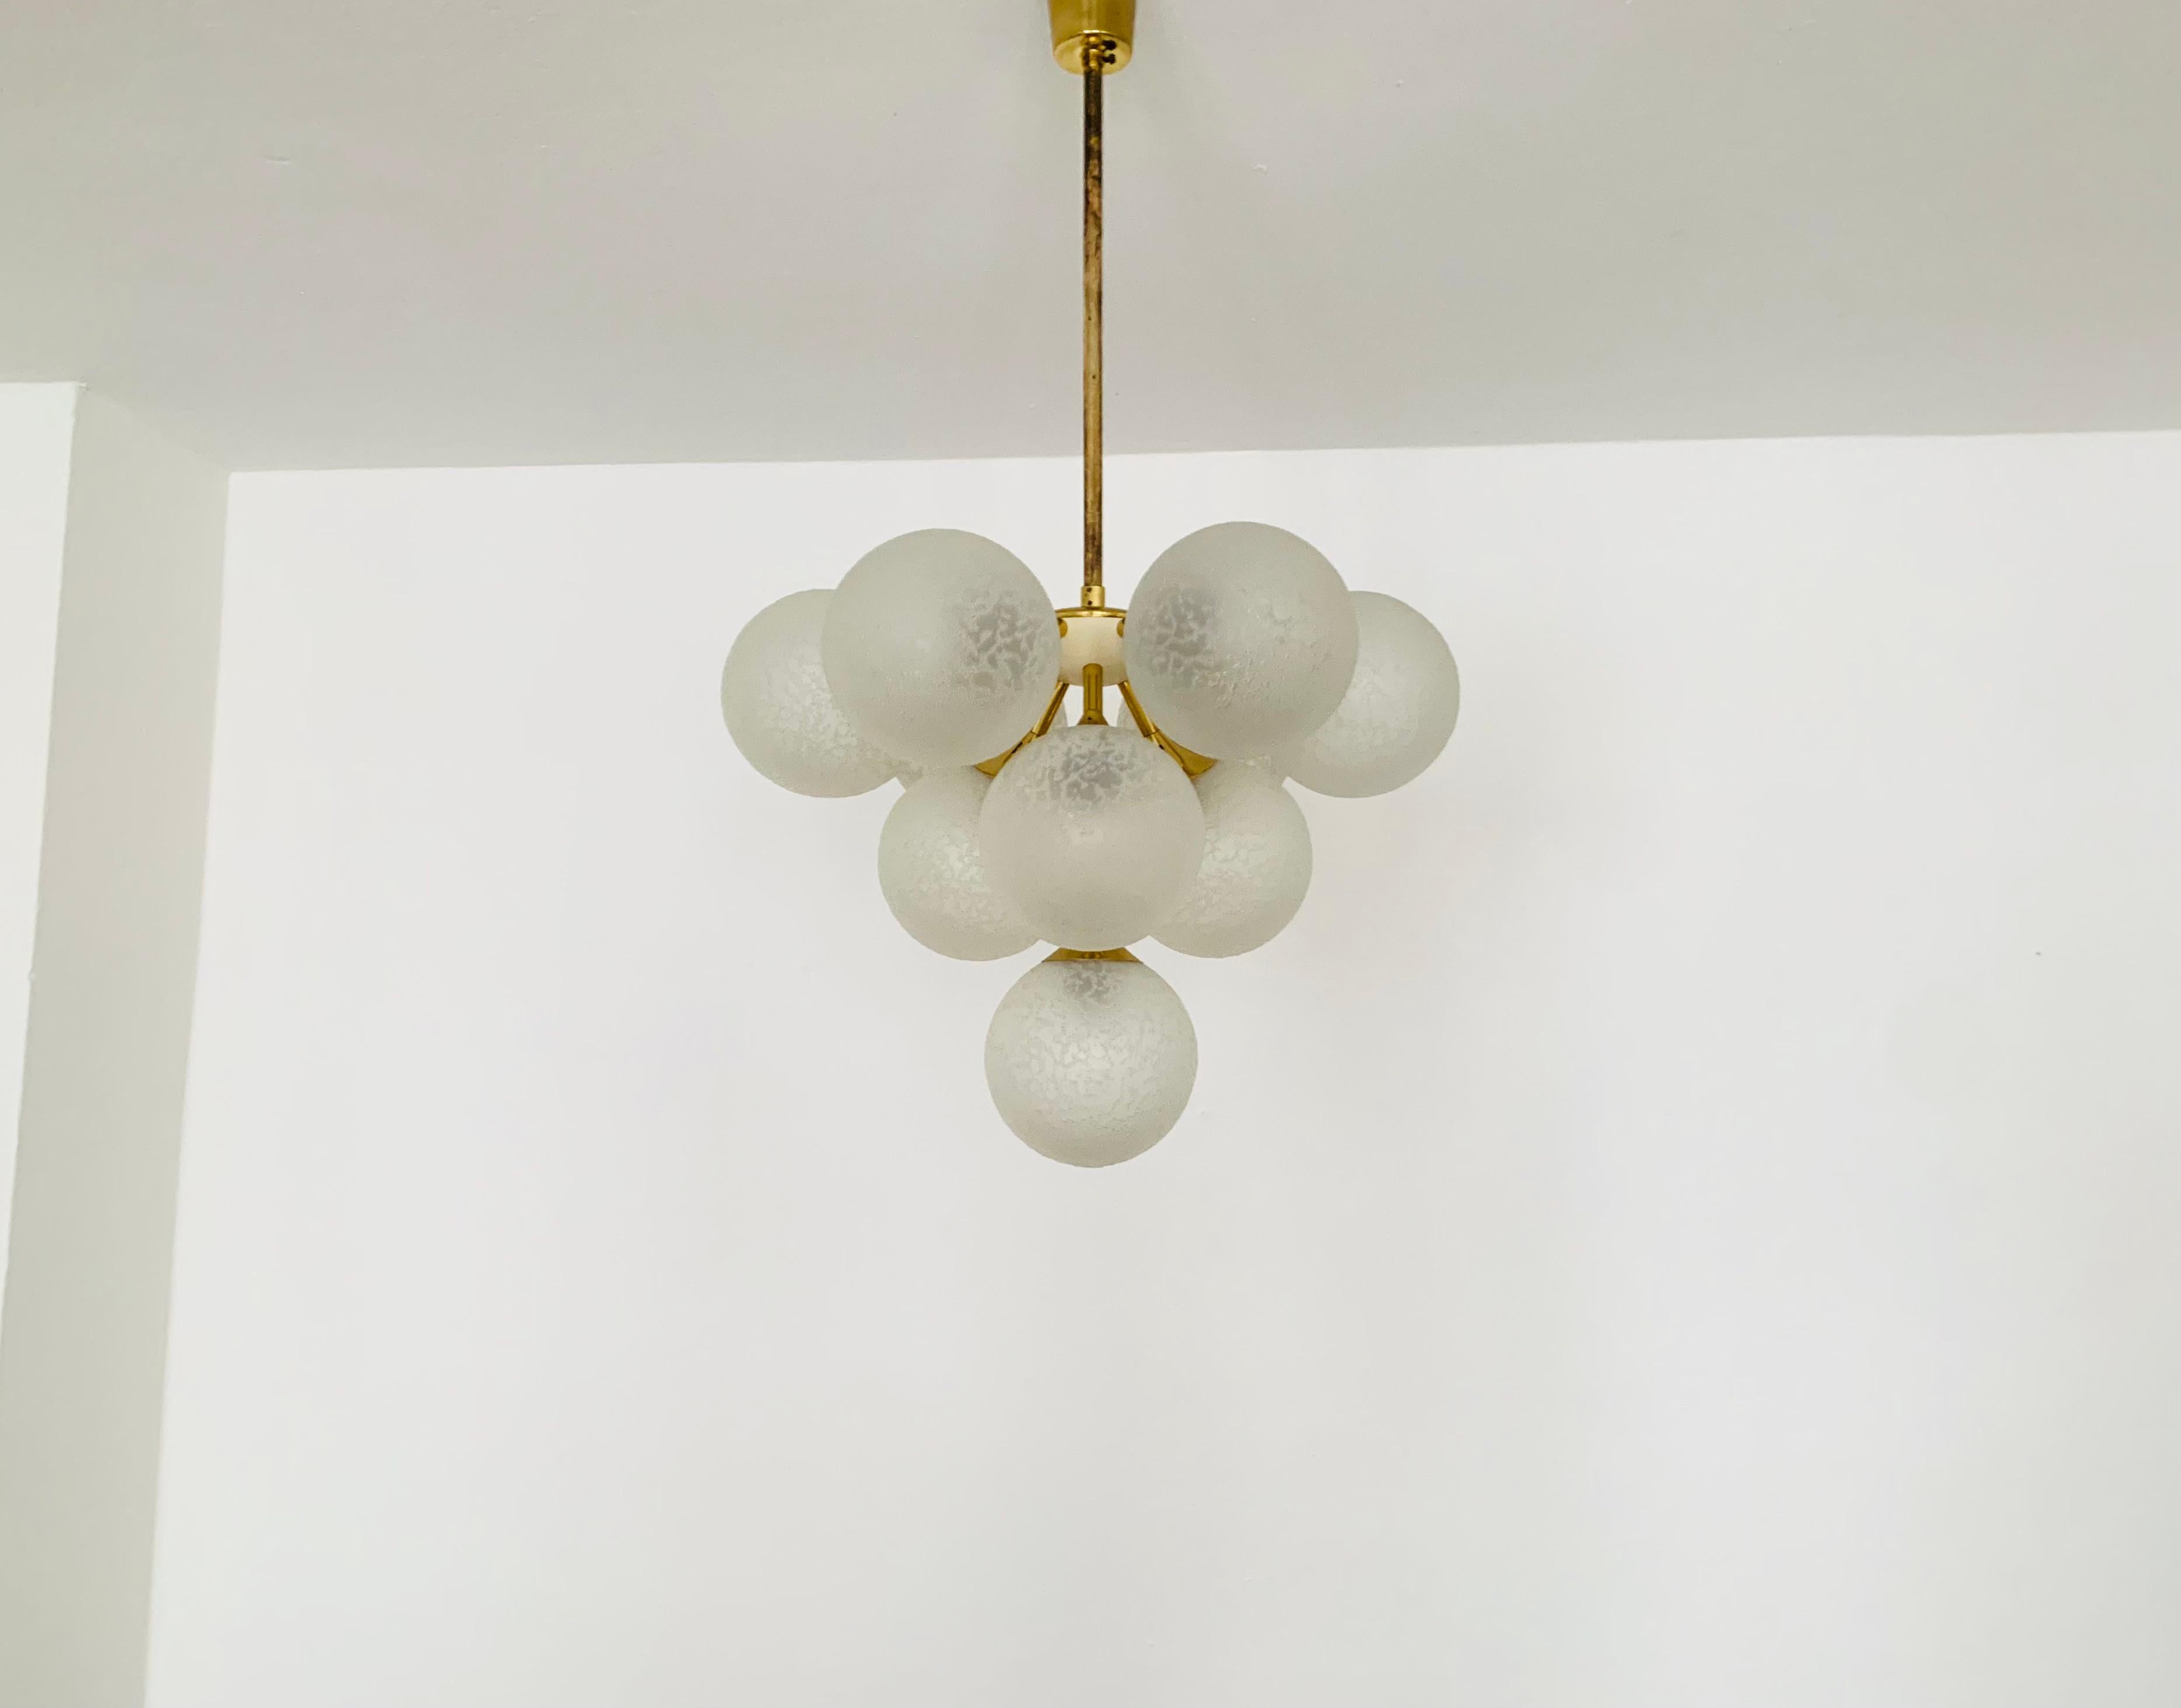 Extremely beautiful and rare Sputnik chandelier from the 1960s.
The 10 special lampshades spread a pleasant light.
The lamp has a very high quality finish.
Very contemporary design with a fantastic look.

Condition:

Very good vintage